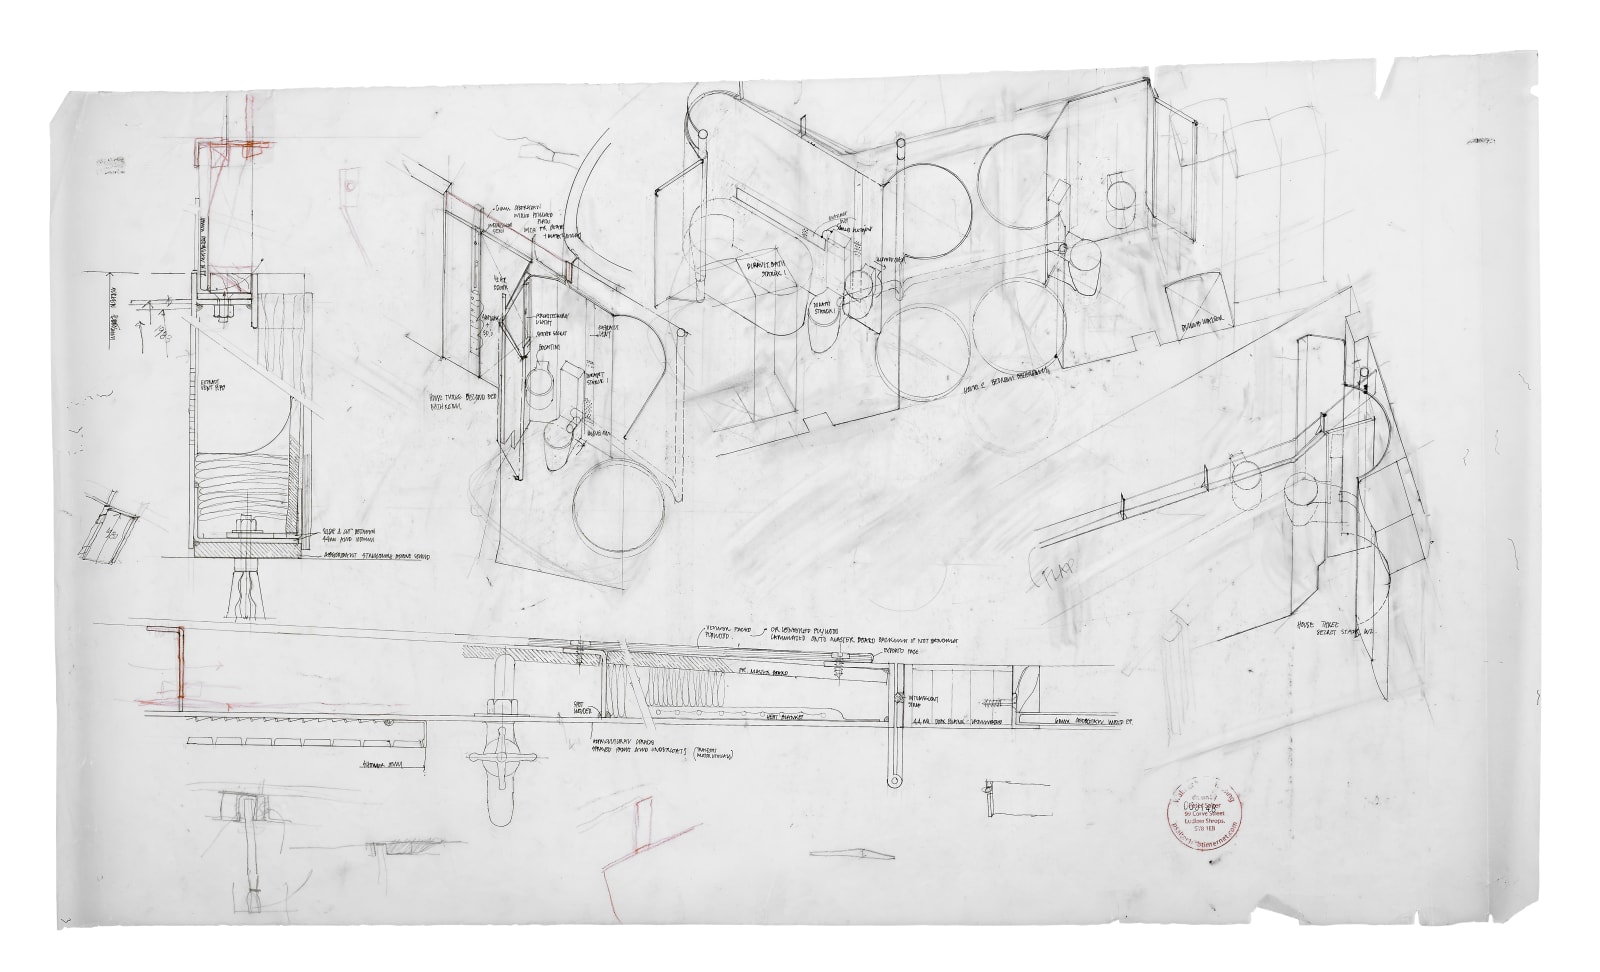 Peter Salter, Preliminary design proposal for bathroom screens (1:25 and full-size), 2008